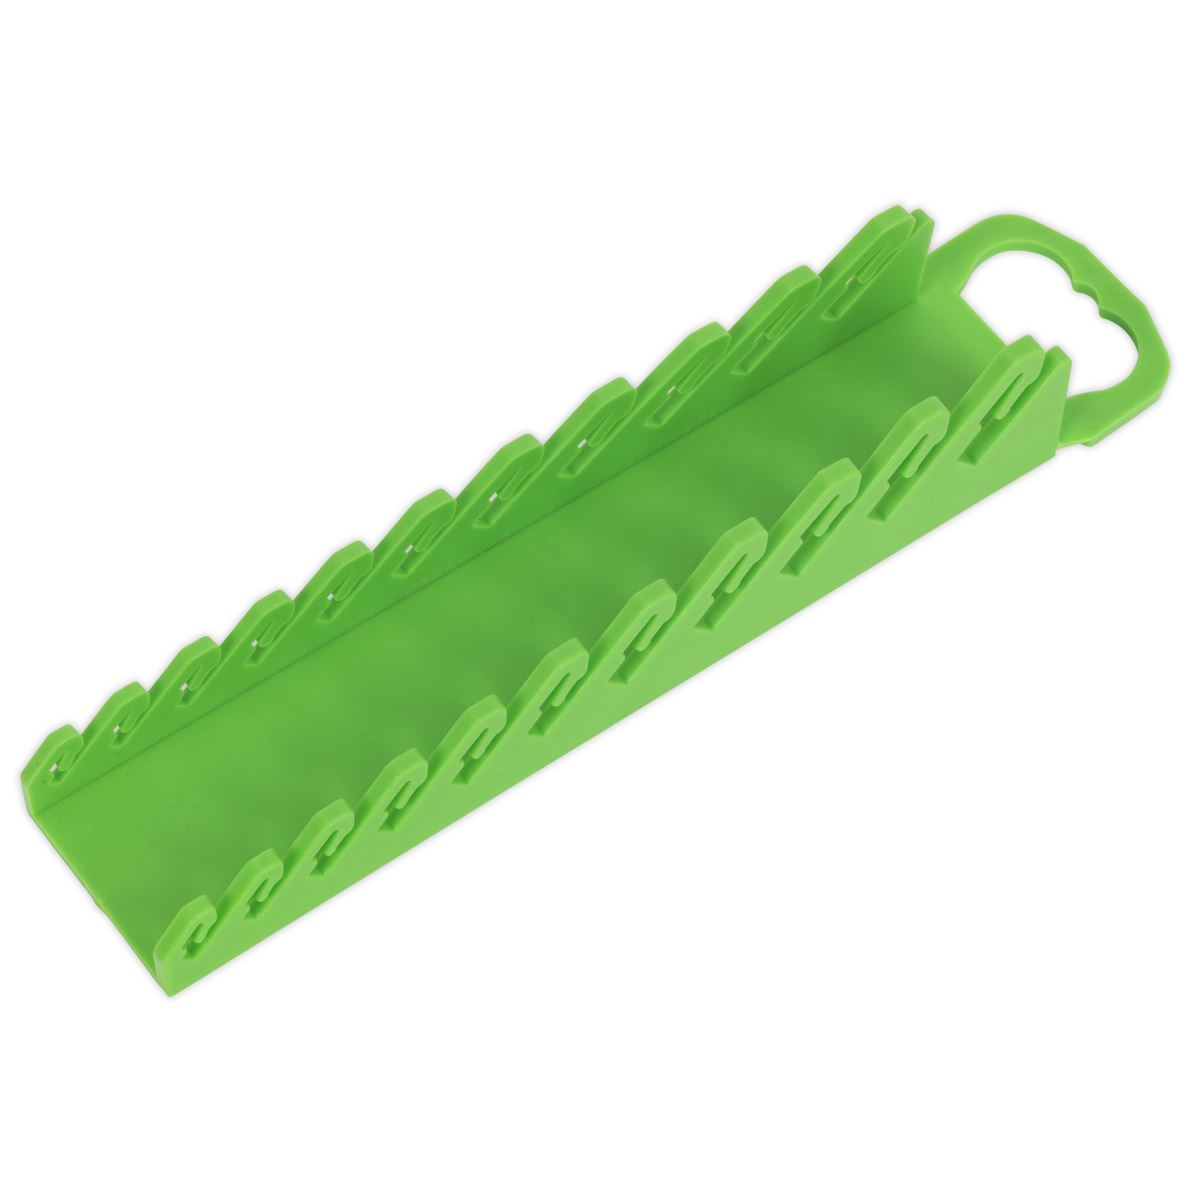 Sealey Premier High Visibility Green Stubby Spanner Rack 10 Capacity Hanging Toolbox